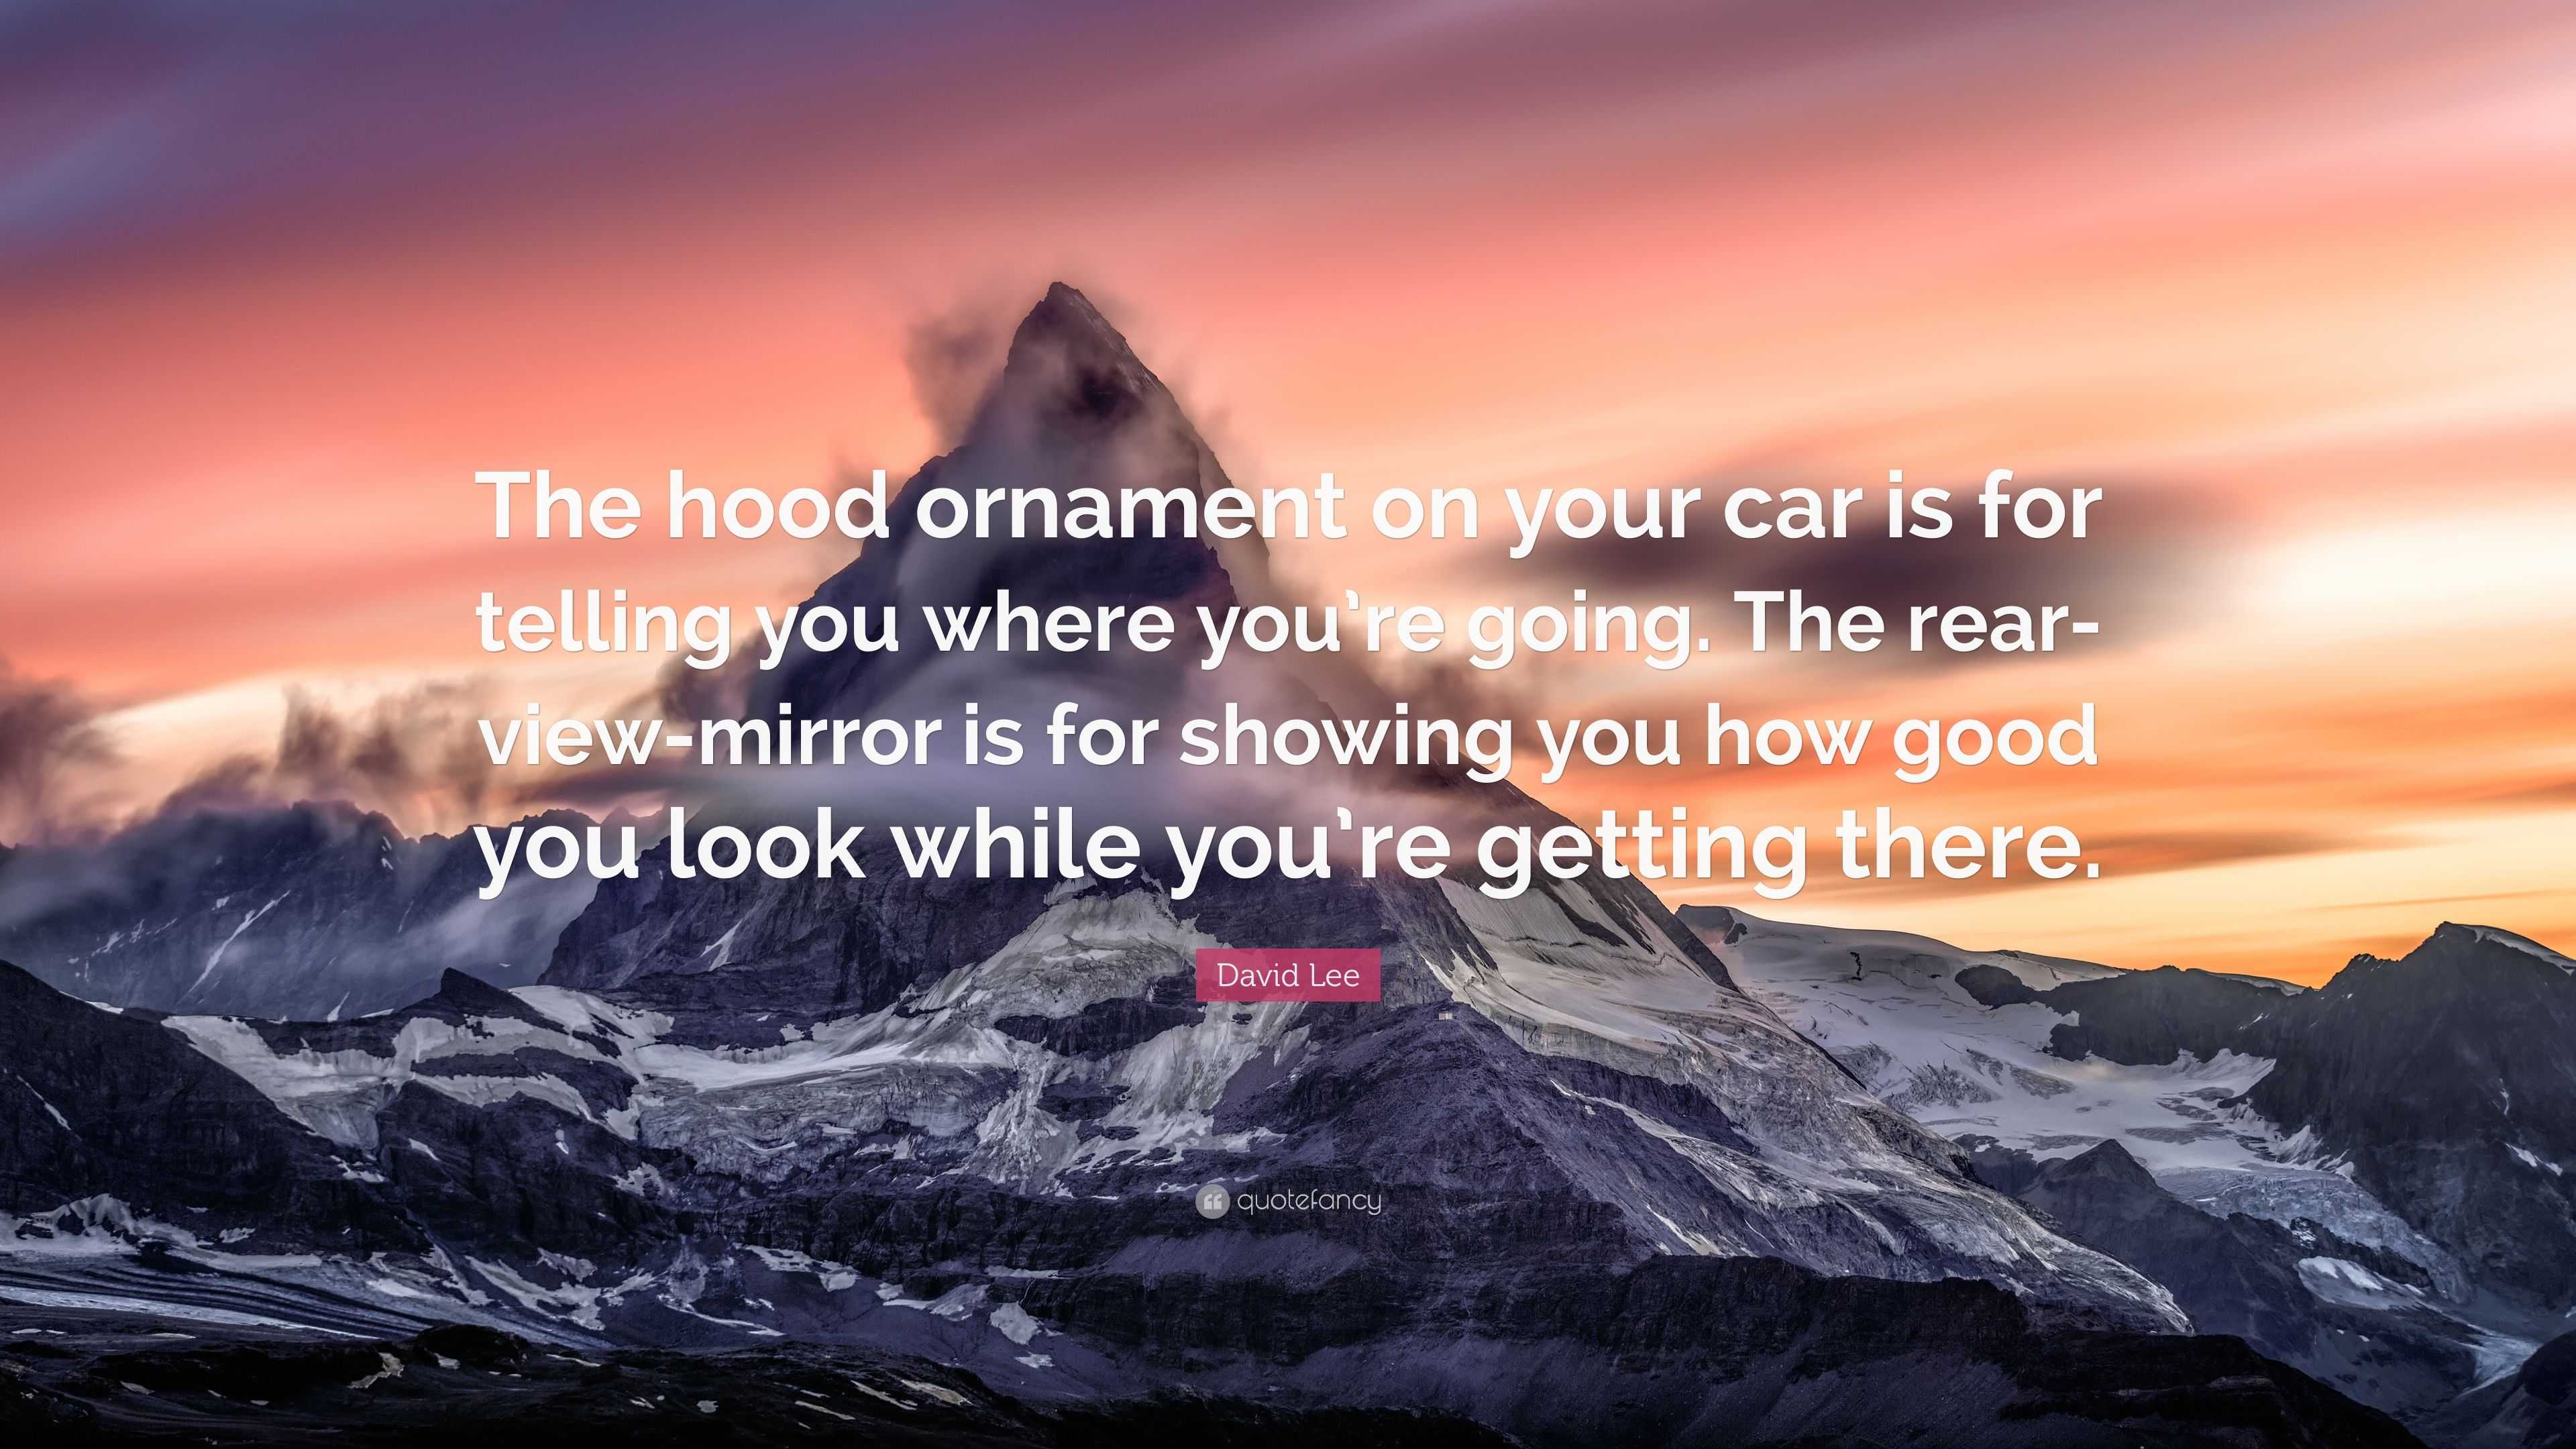 David Lee Quote: “The hood ornament on your car is for telling you